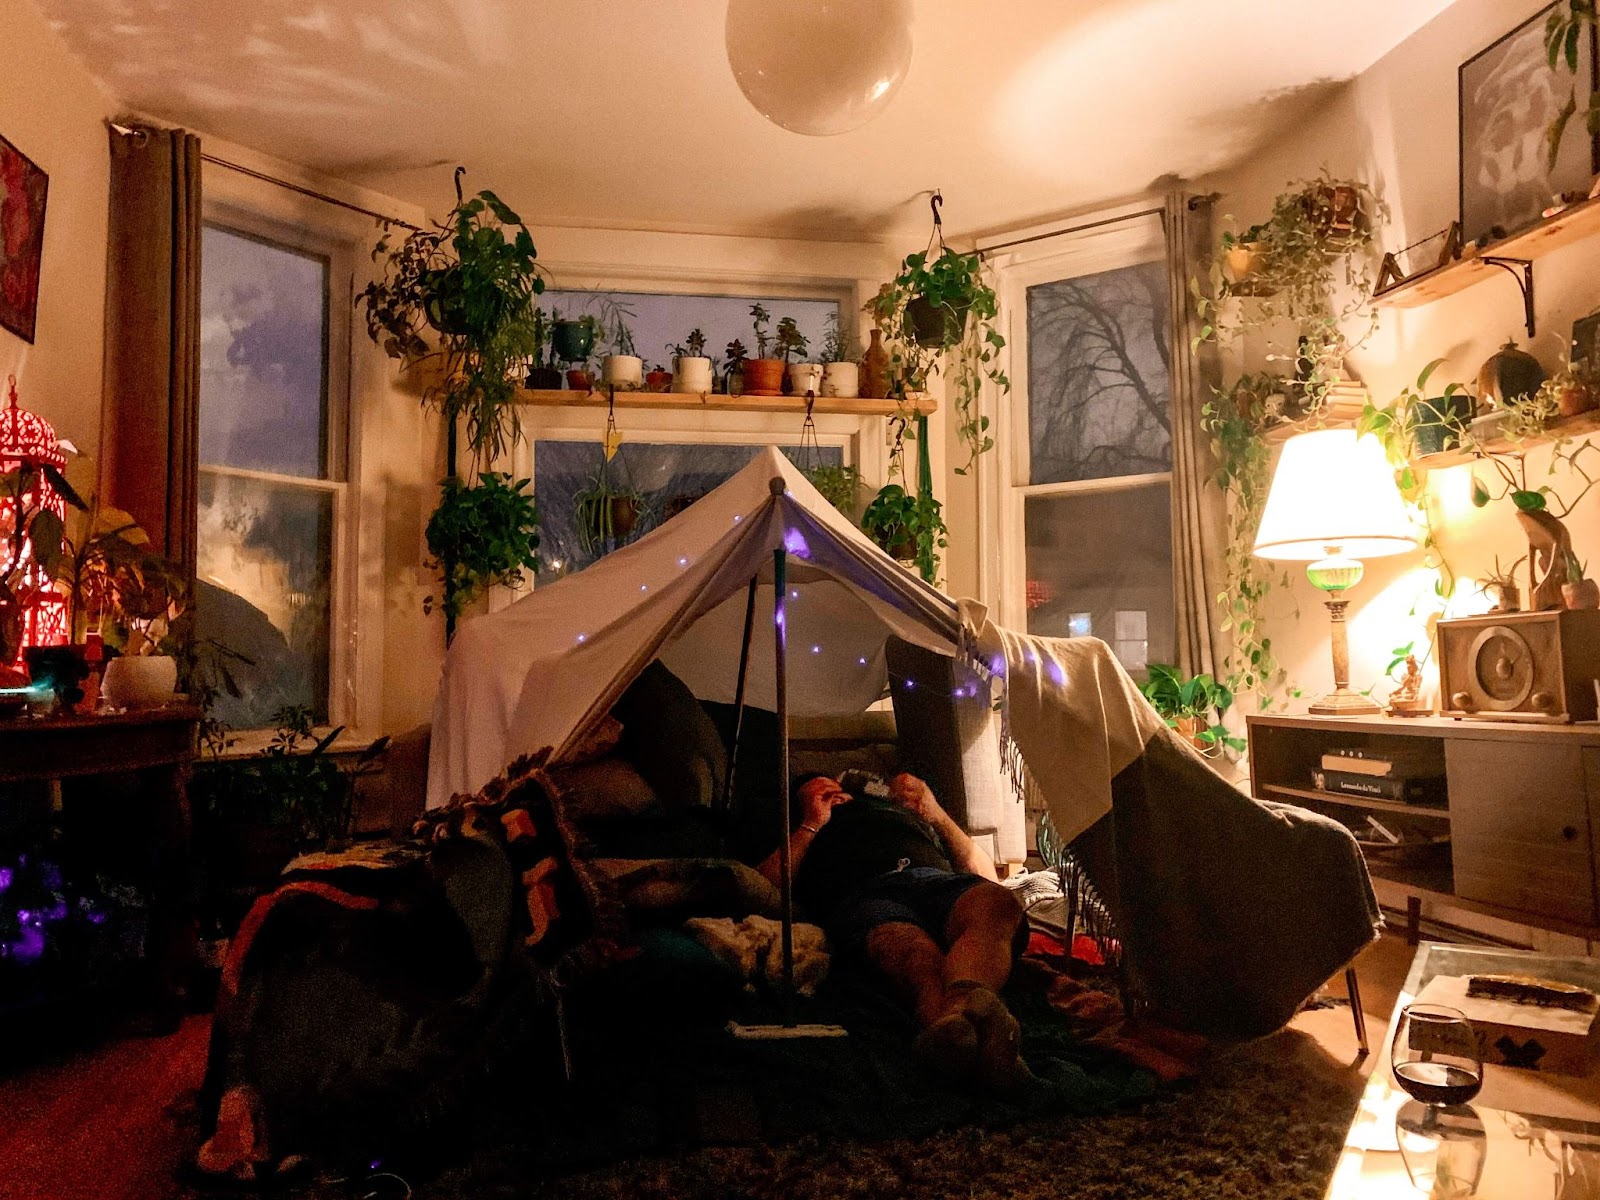 living room fort for at home date night idea